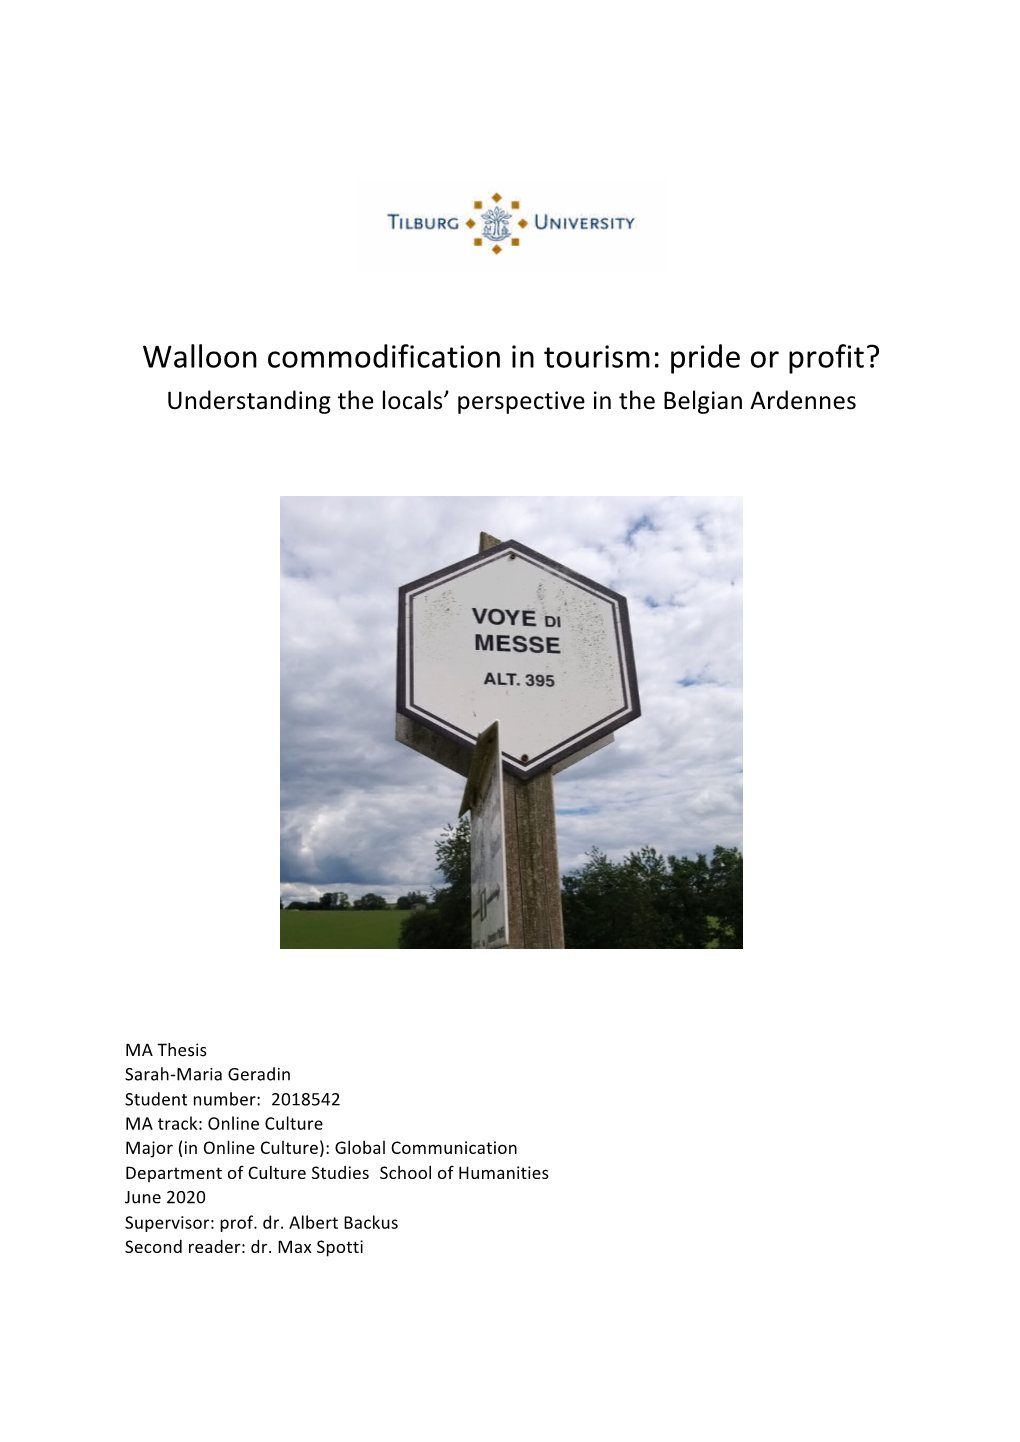 Walloon Commodification in Tourism: Pride Or Profit? Understanding the Locals’ Perspective in the Belgian Ardennes